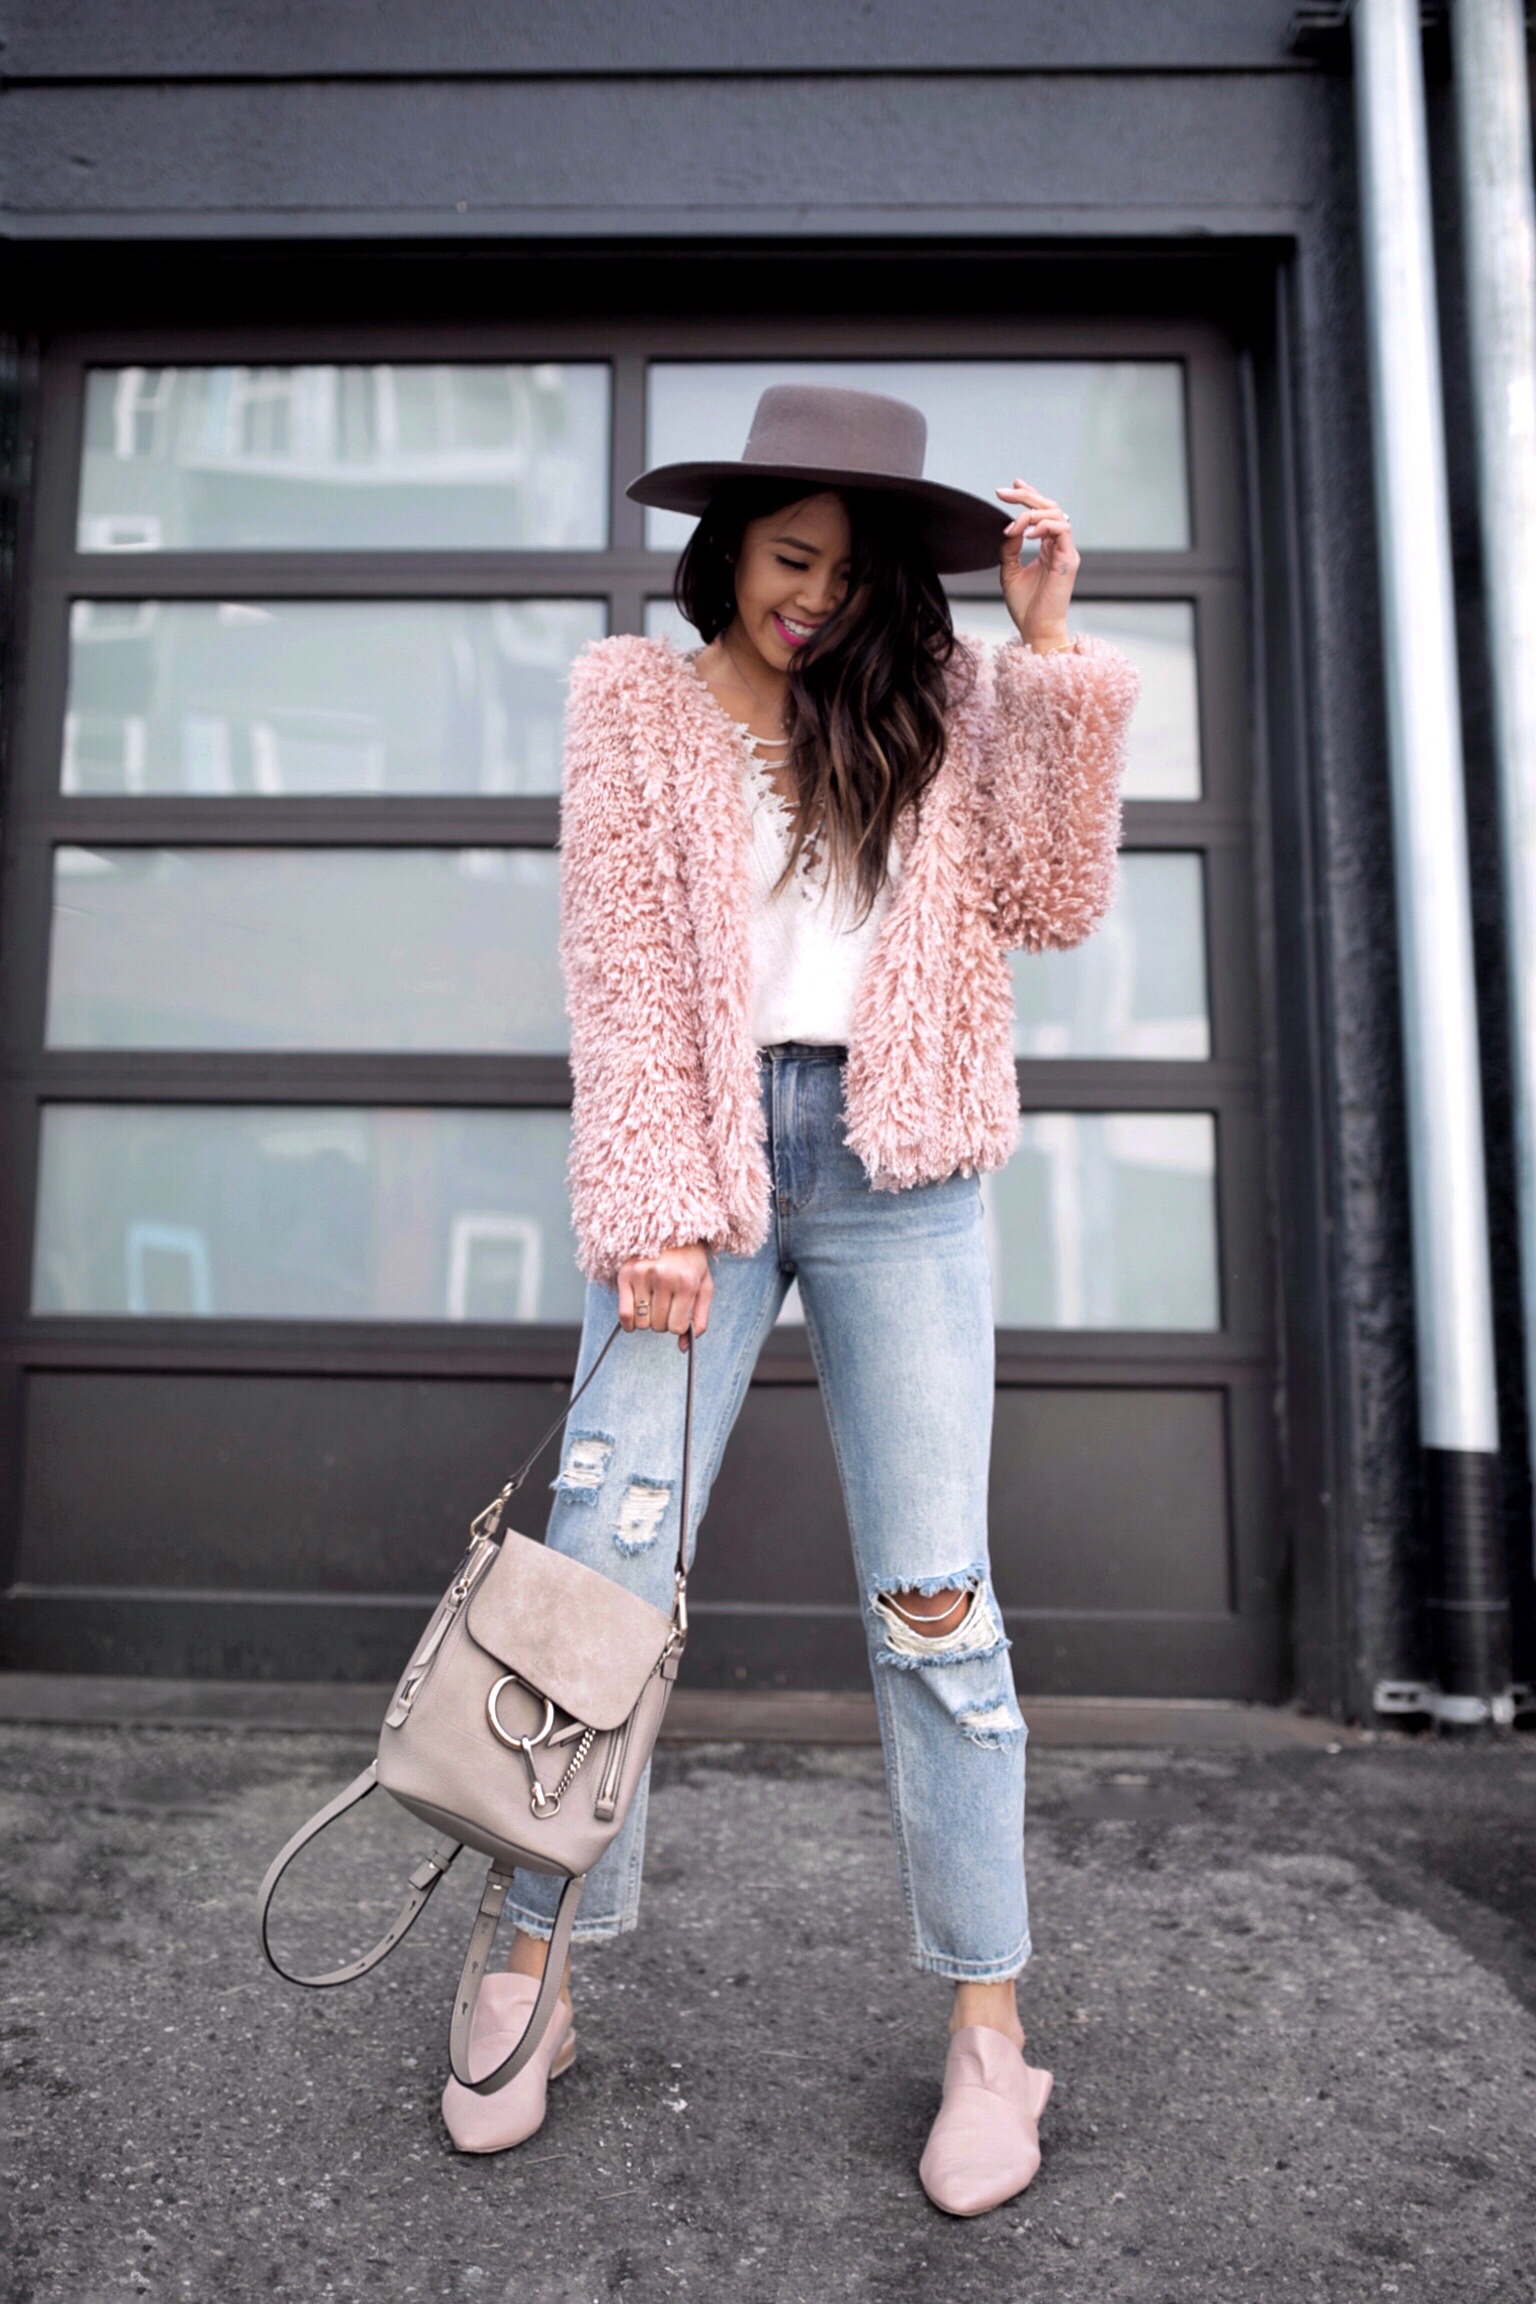 How to casually wear pink shaggy jacket